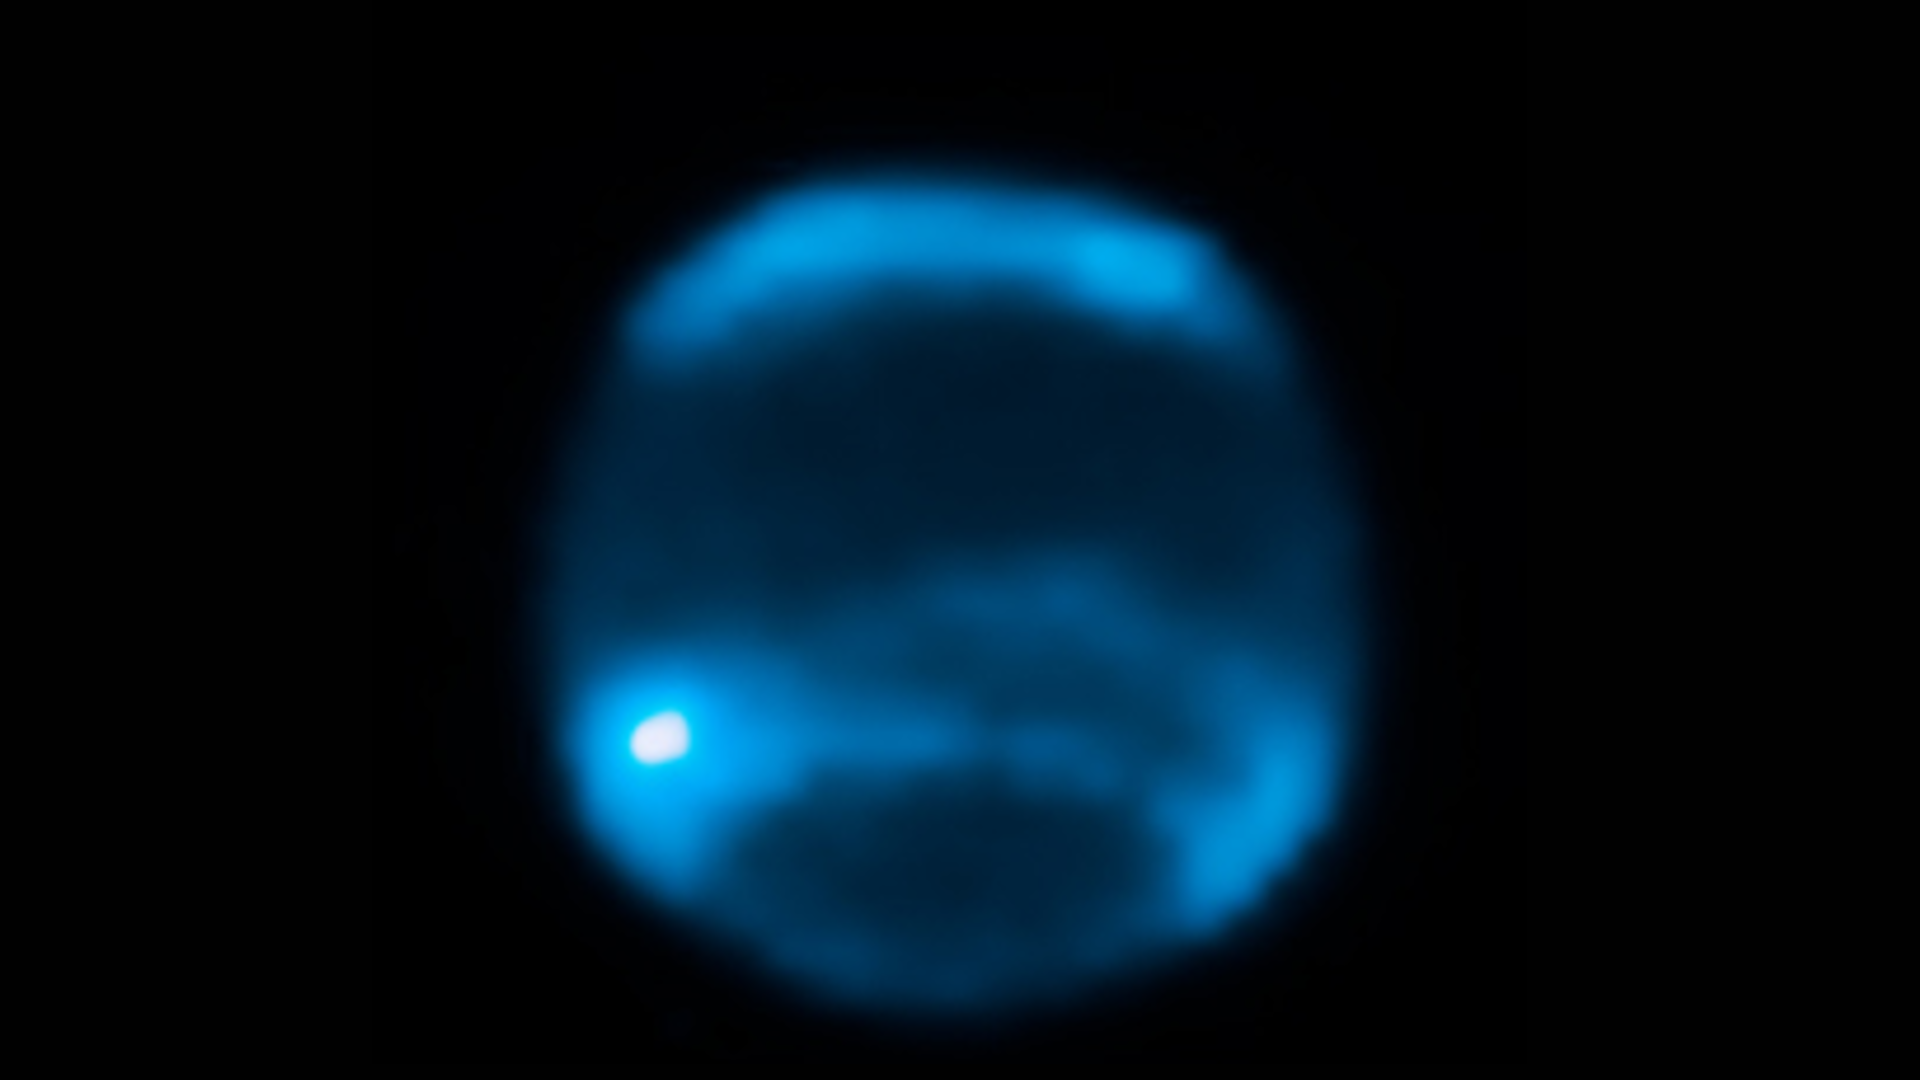 Blurry image of neptune, striped in thick bands of blue and dark blue.